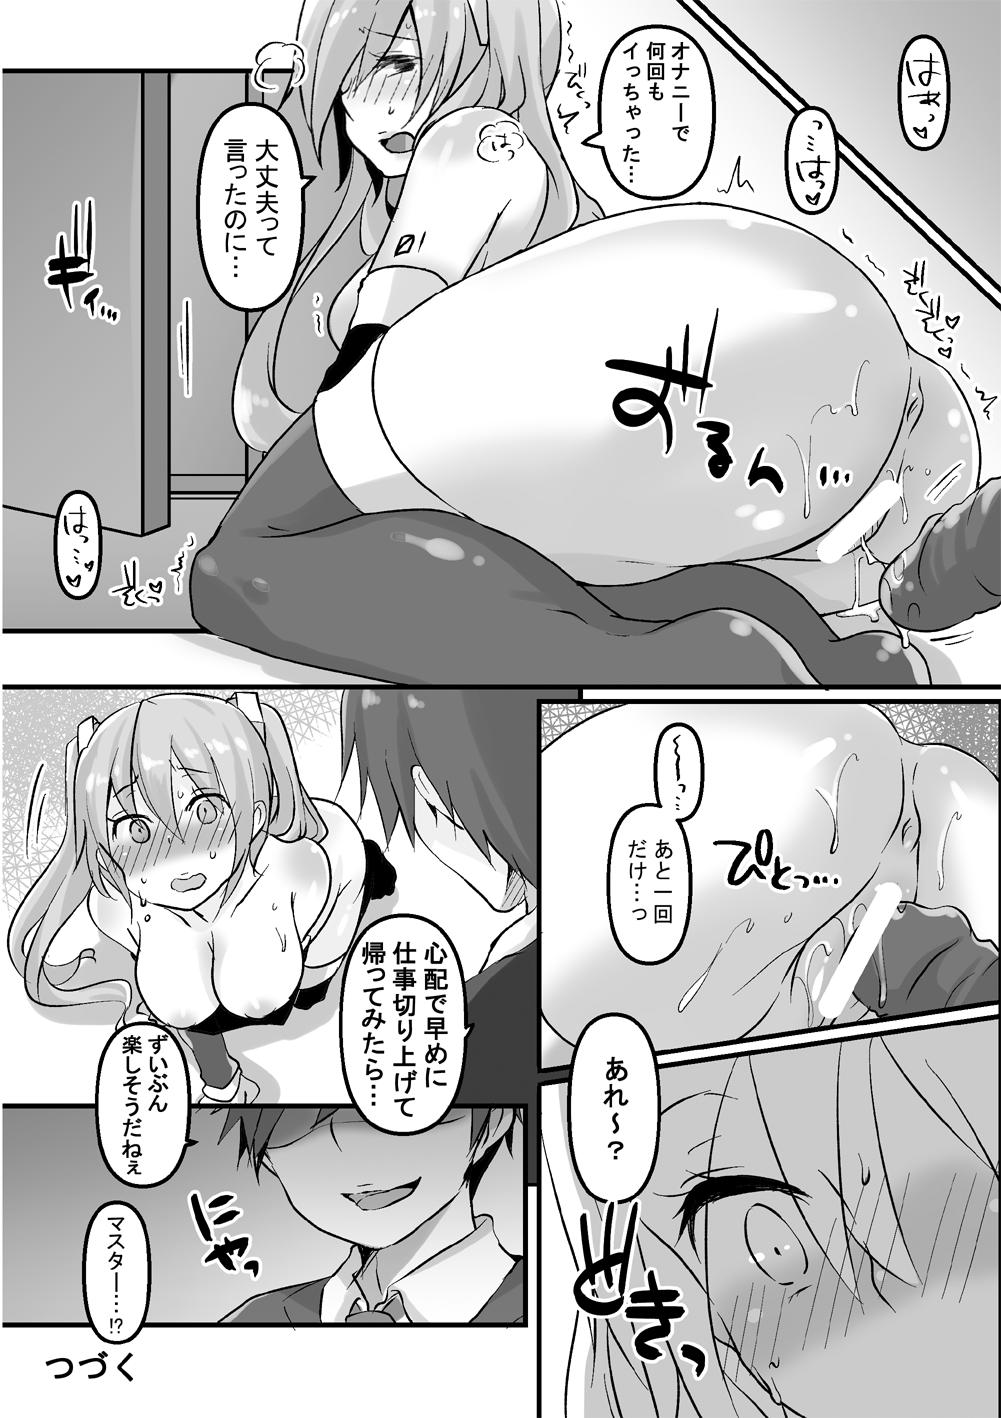 Gay Trimmed C96 Omakebon. - Vocaloid Groping - Page 6